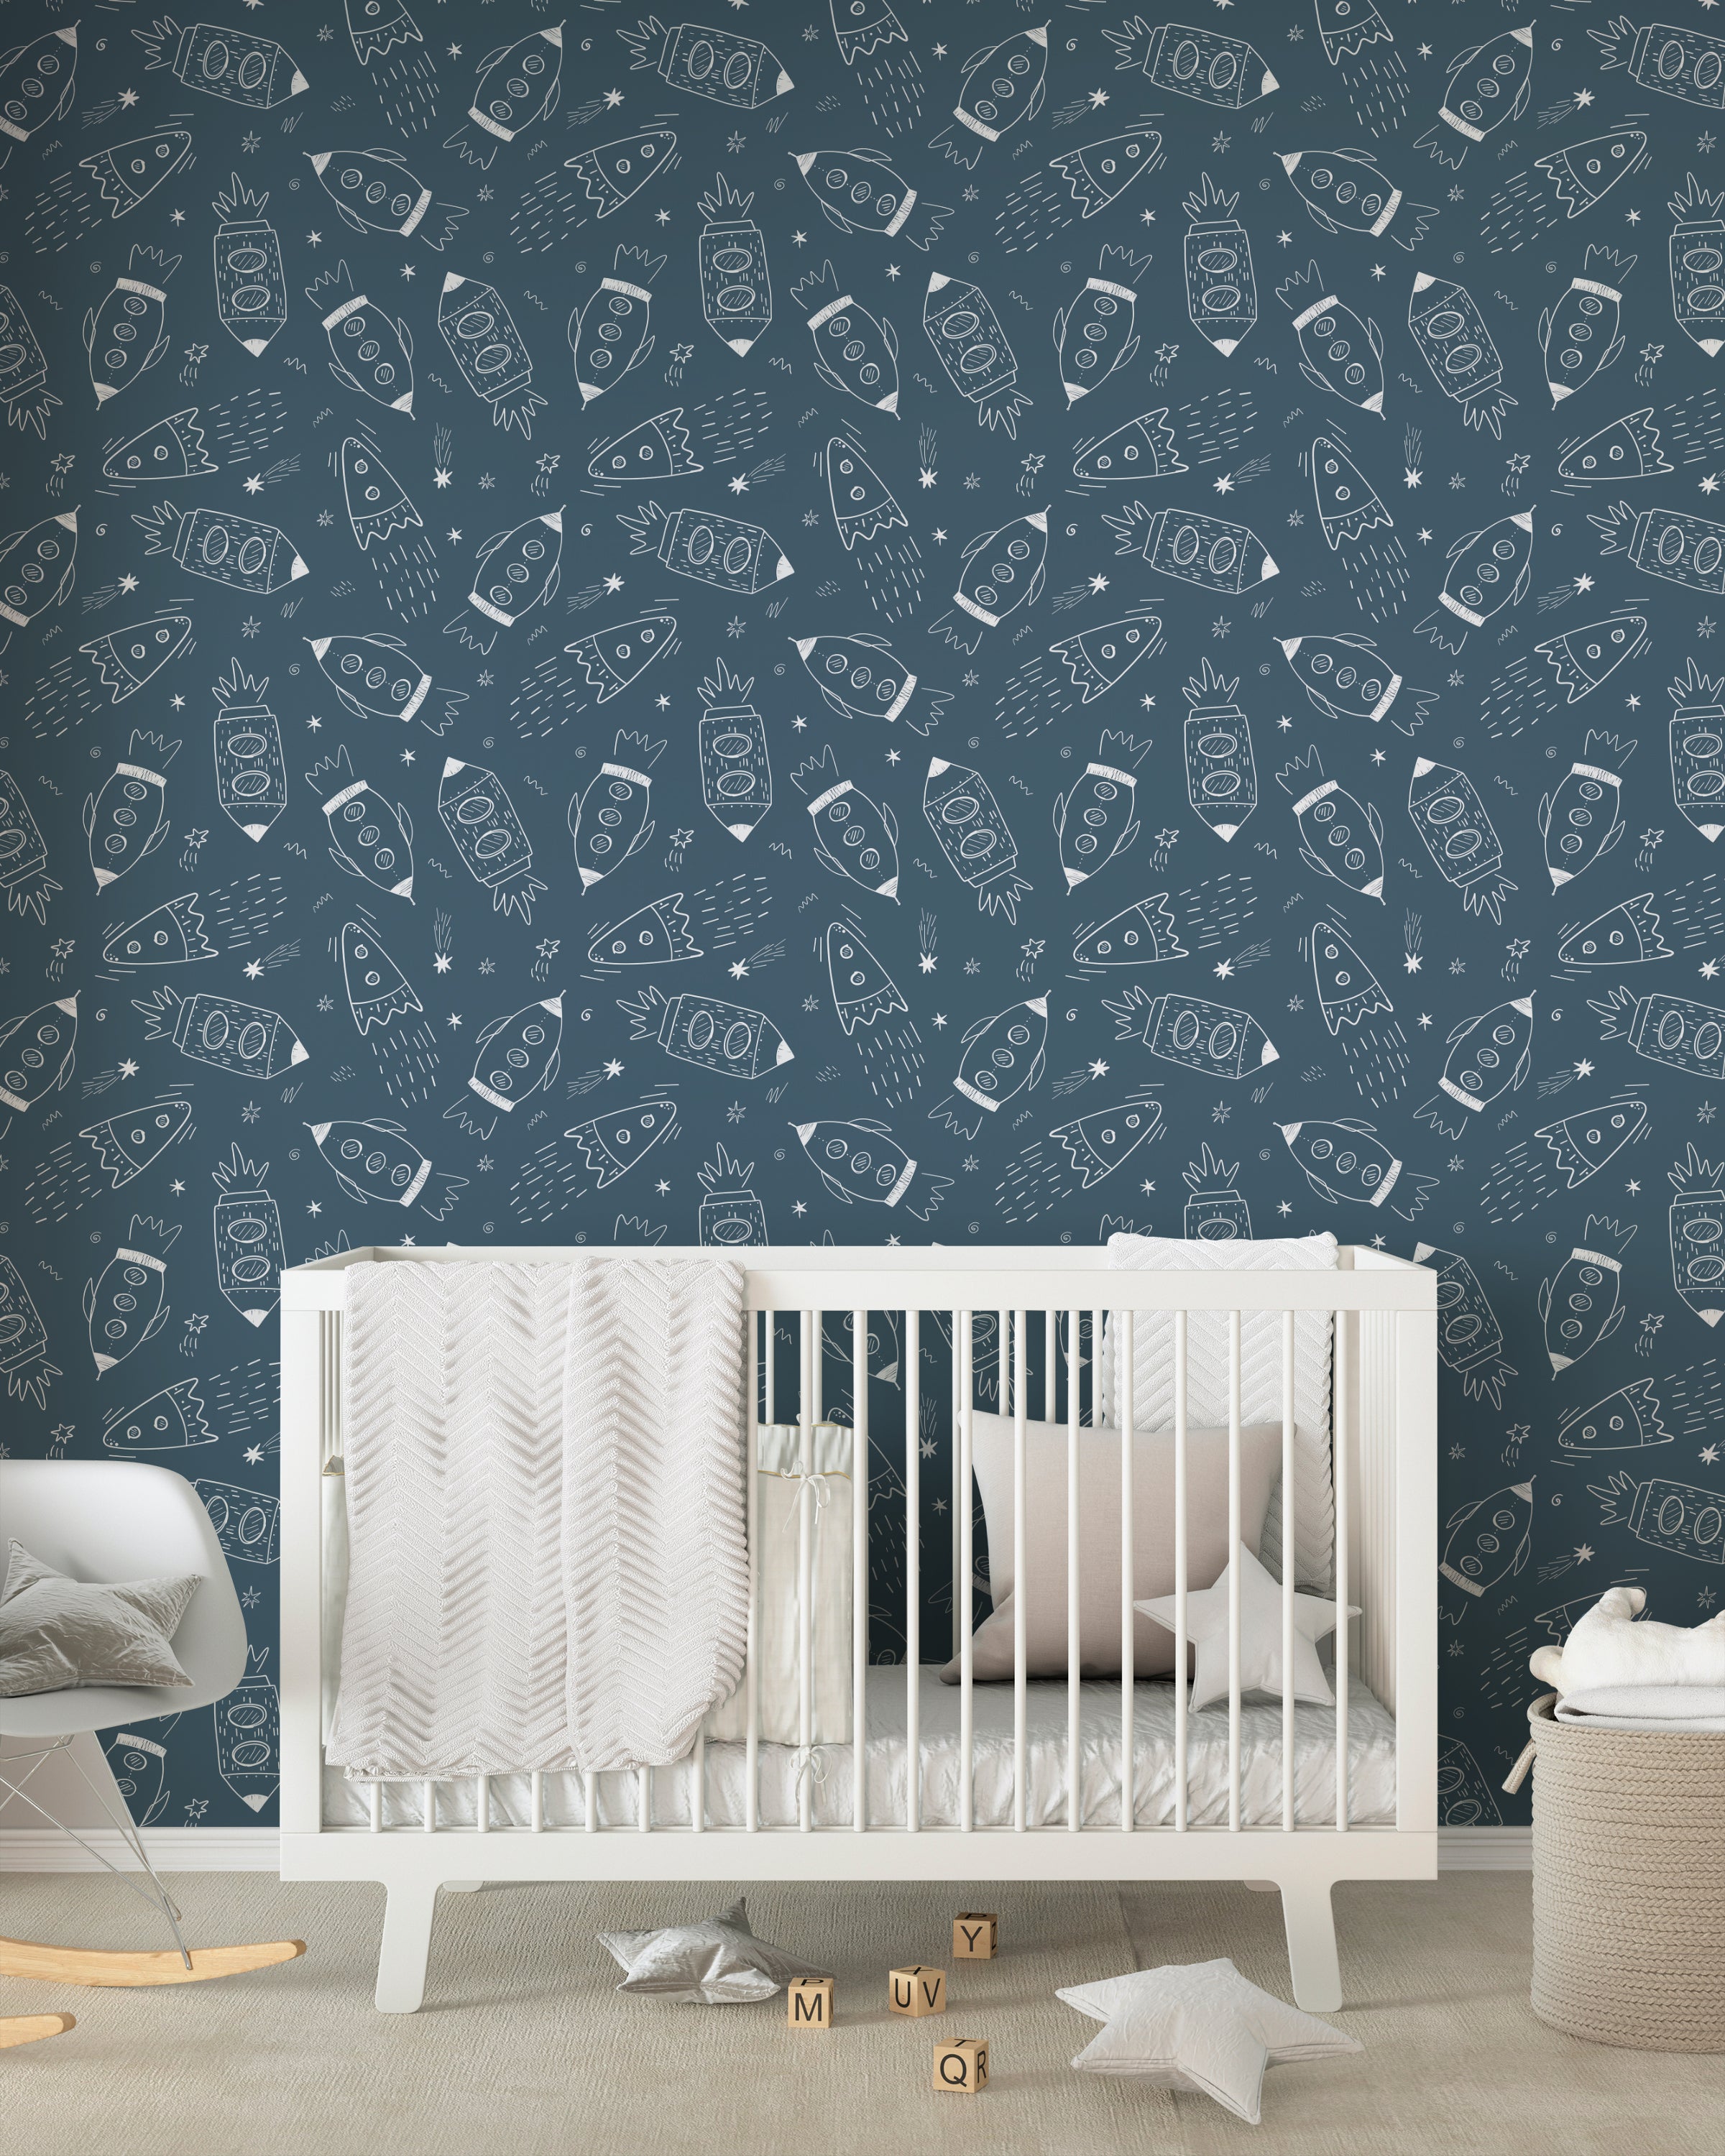 A nursery with walls adorned by 'Cosmic Doodles' wallpaper, complemented by a white crib, star-shaped pillows, and soft, inviting textures.